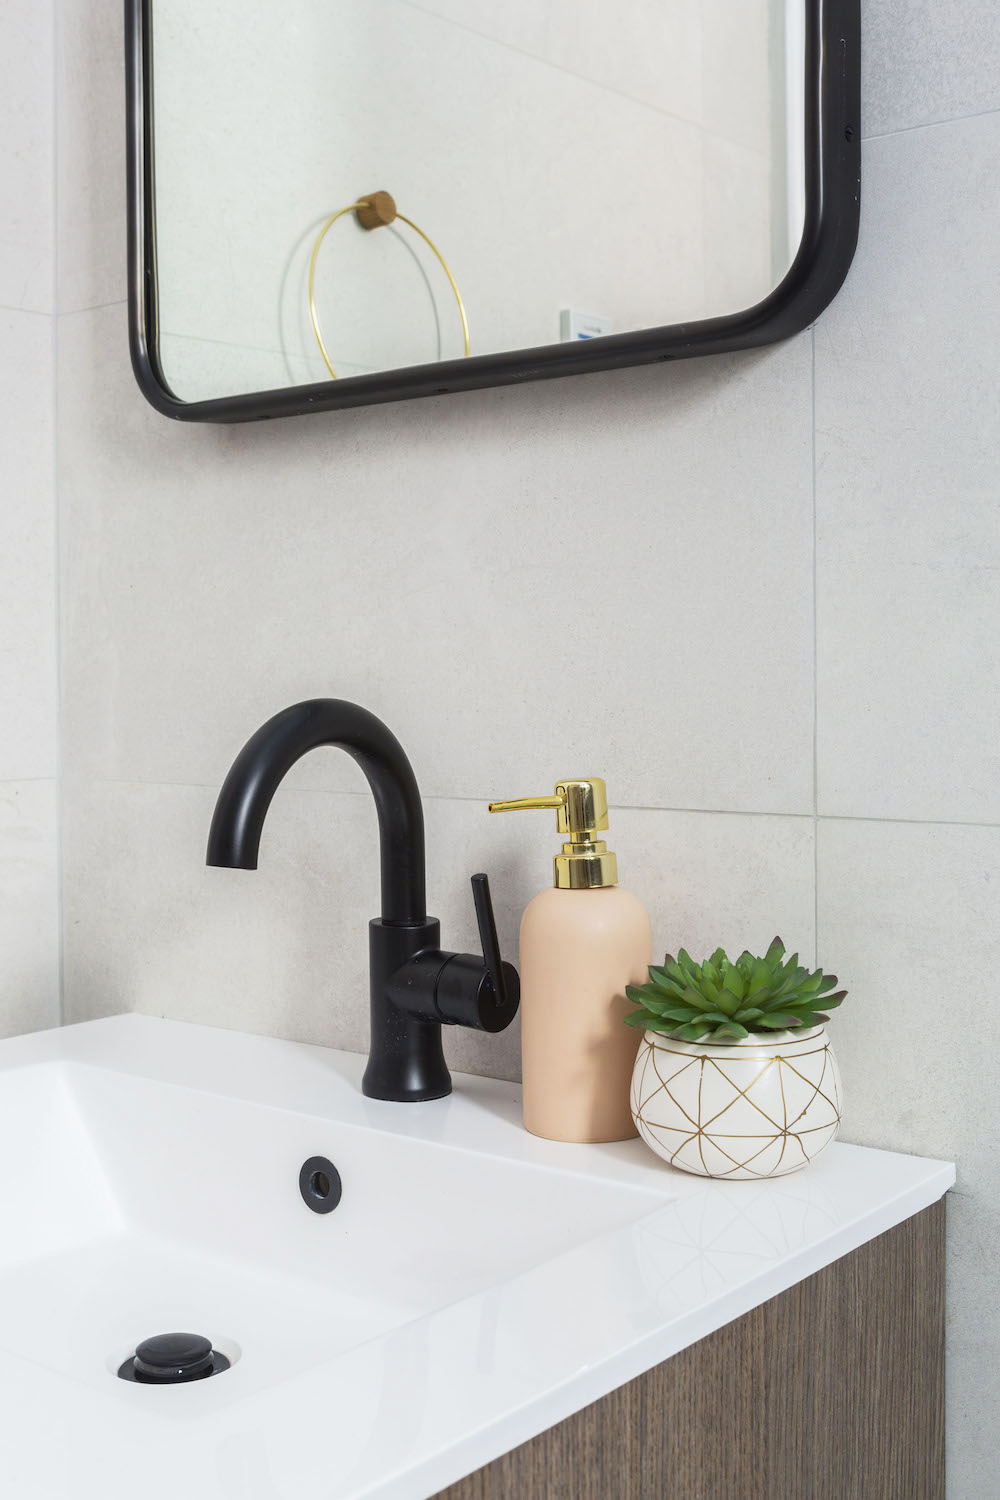 single wooden vanity with black faucet and mirror and off-white wall tiles after renovation